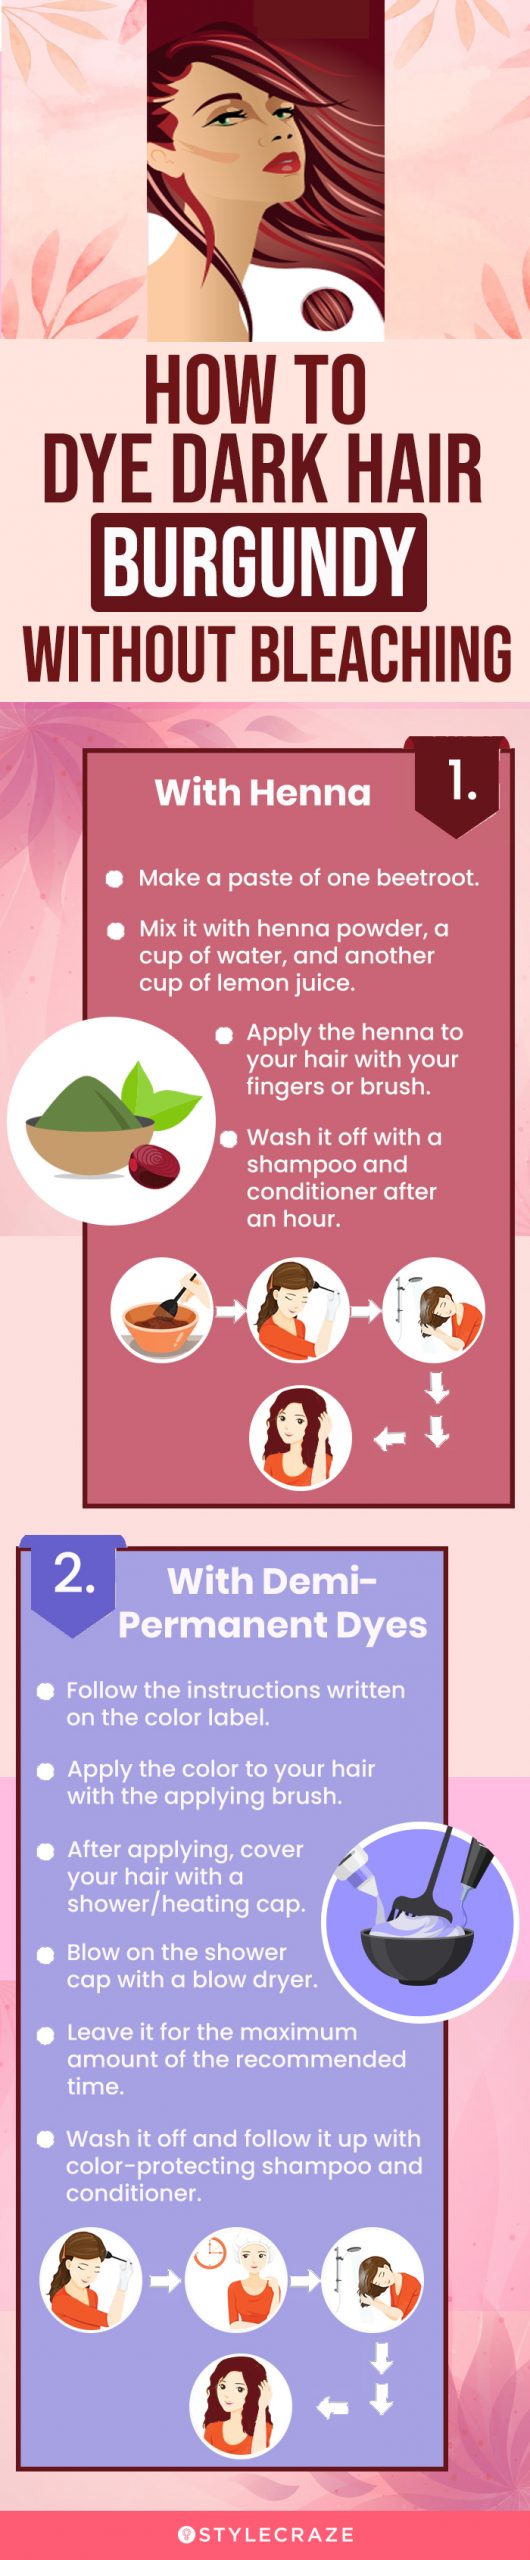 how to dye dark hair burgundy without bleaching (infographic)